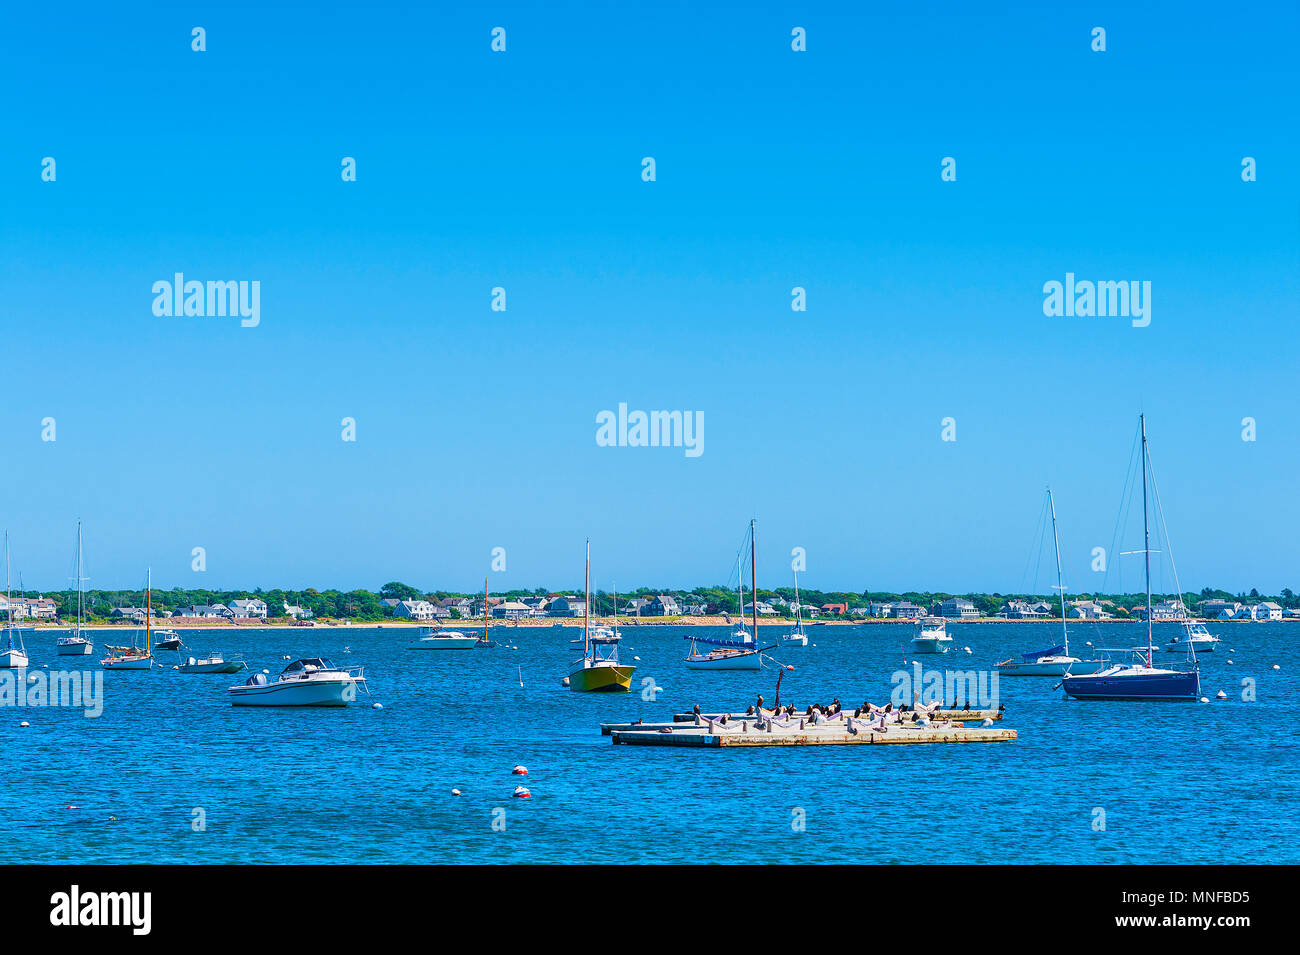 Hyannis Port, Massachusetts, USA - September 13, 2016:  Anchored boats of various sizes and shapes float in the harbor of Hyannis Port, on Cape Cod in Stock Photo